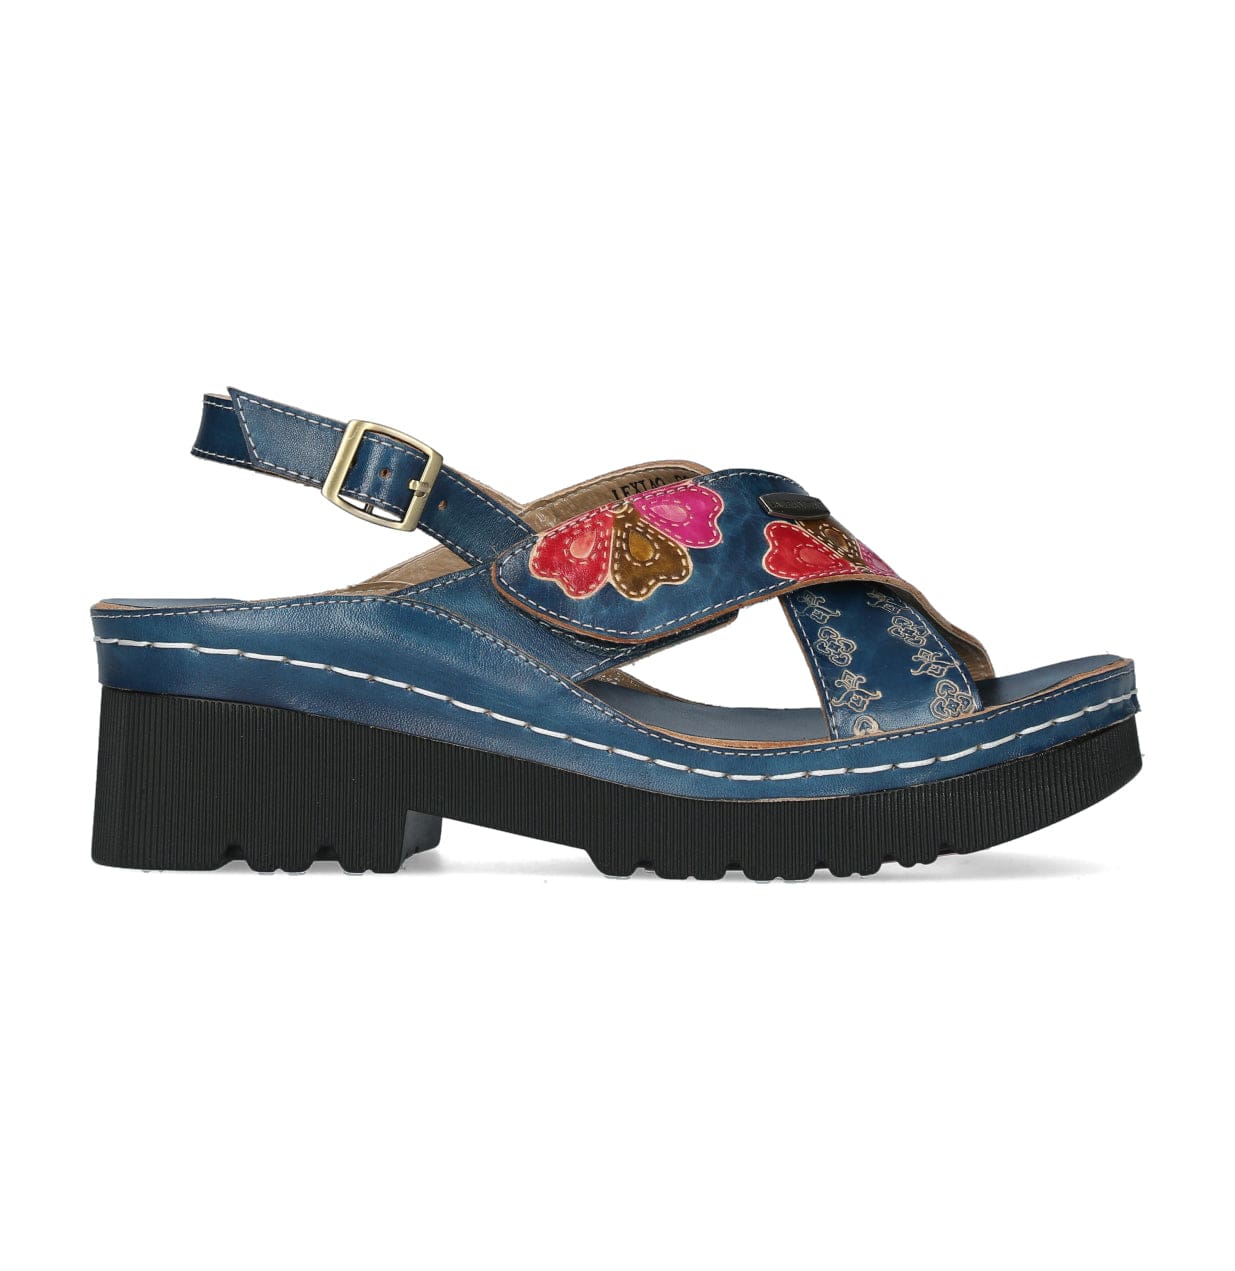 Chaussures LEXIAO 06 - 35 / Jeans - Sandale